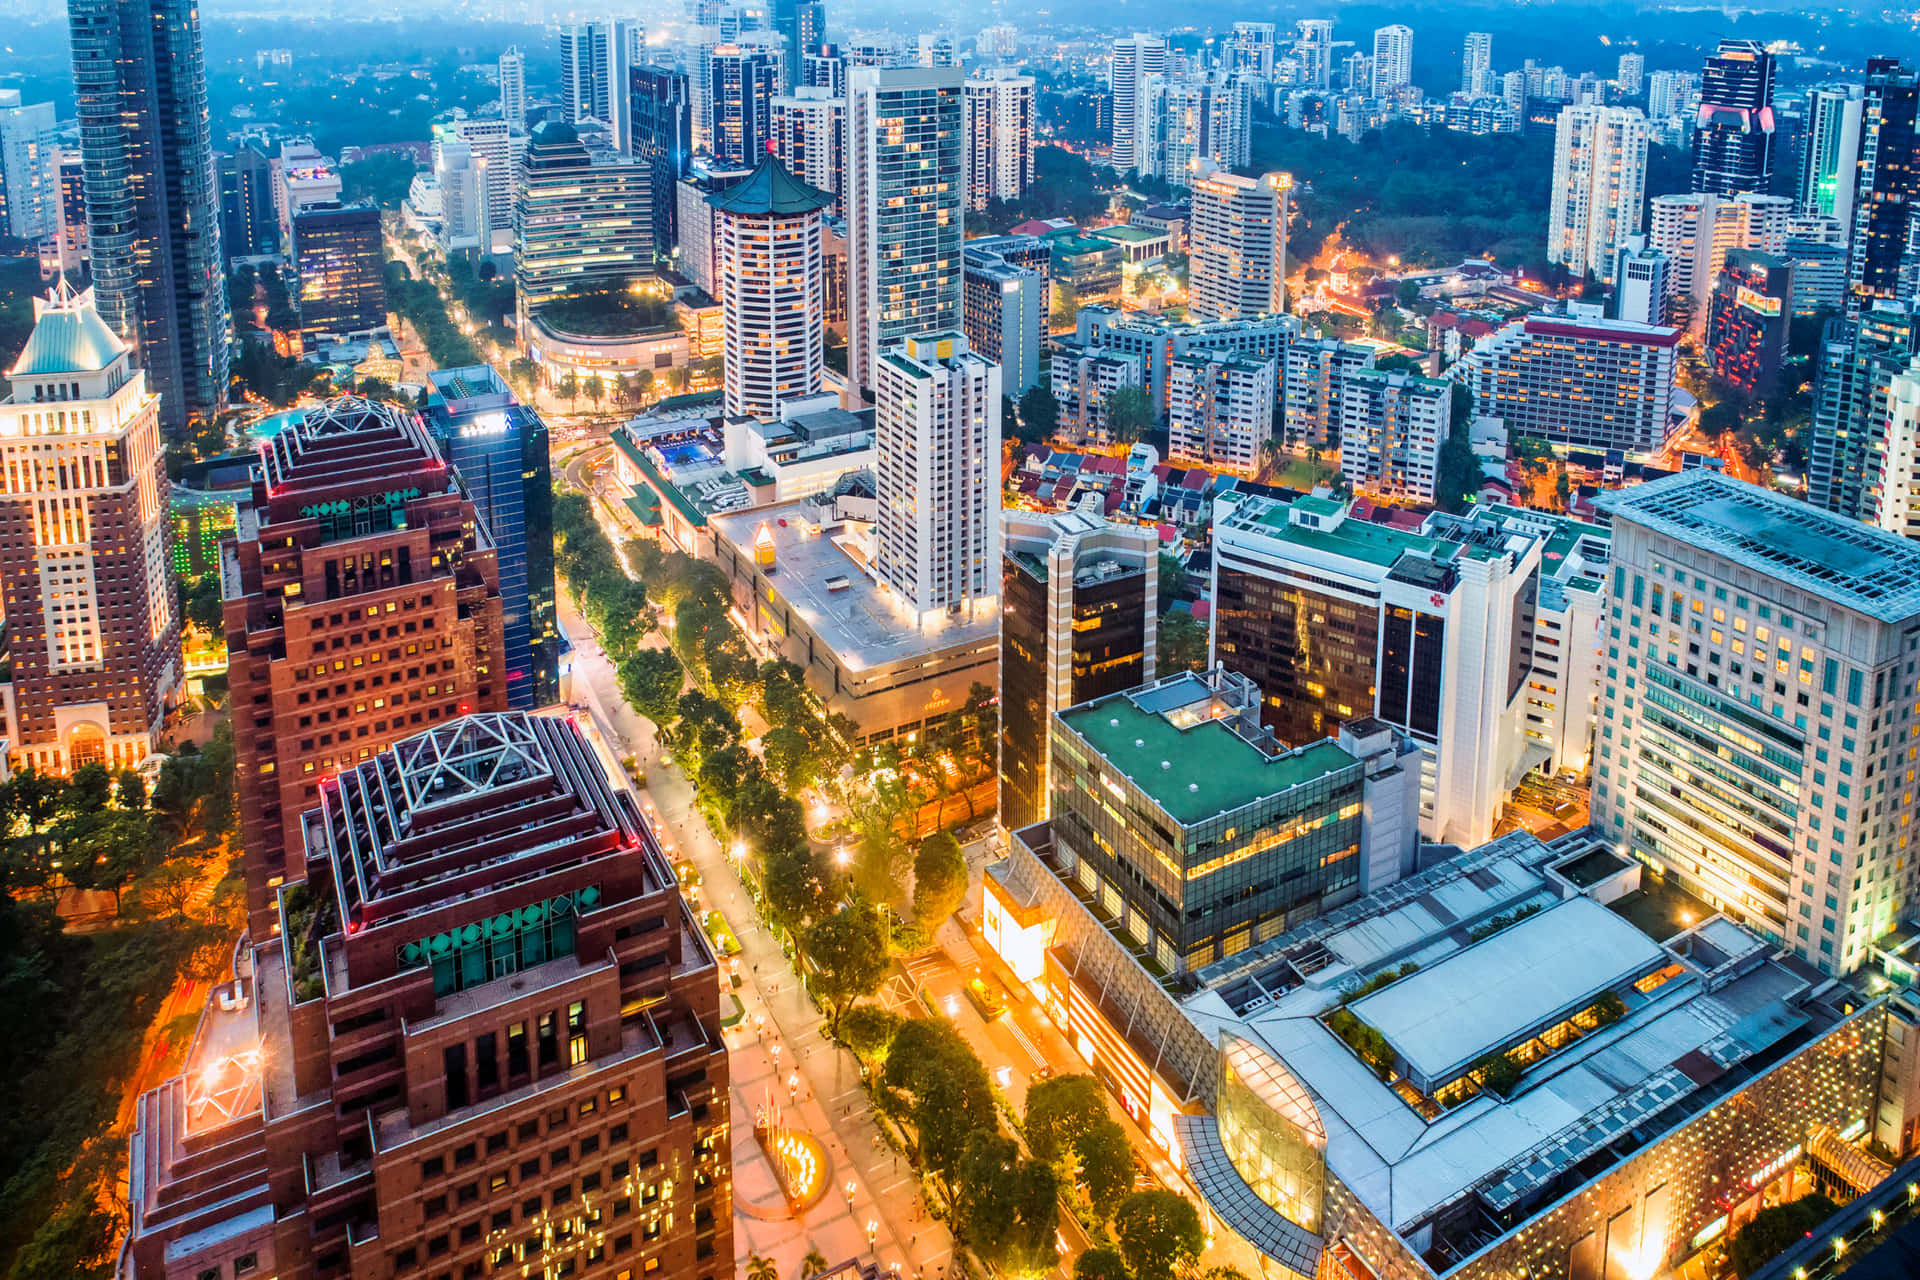 Orchard Road Singapore Twilight Aerial View Wallpaper